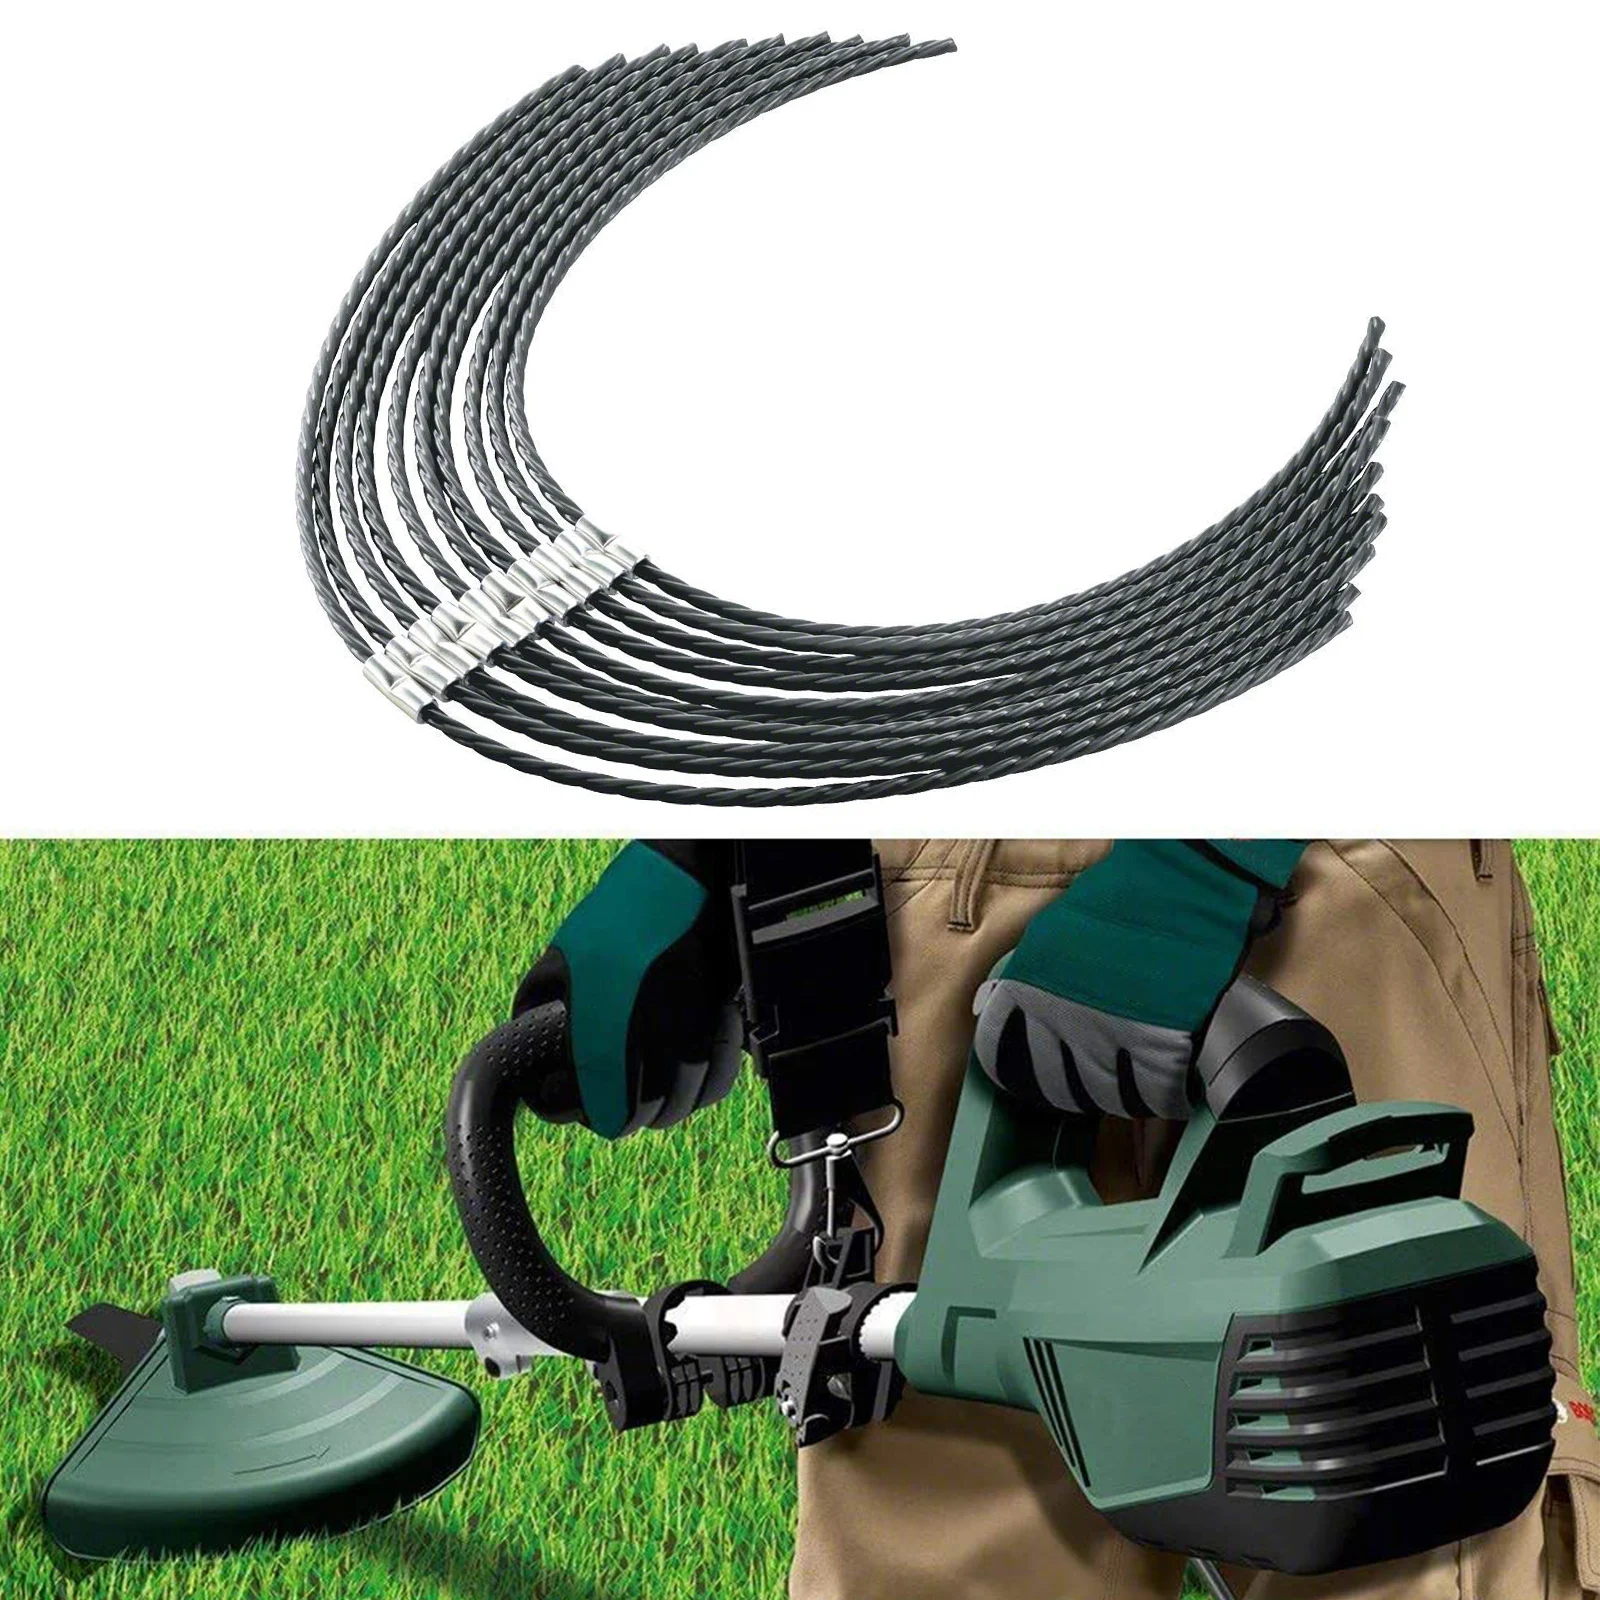 

10PCS Spool Line Grass Trimmer Plastic Line For BOSCH AFS 23-37 Brush Cutter Strimmer Line Mowing Wire Lawn Mower Accessory